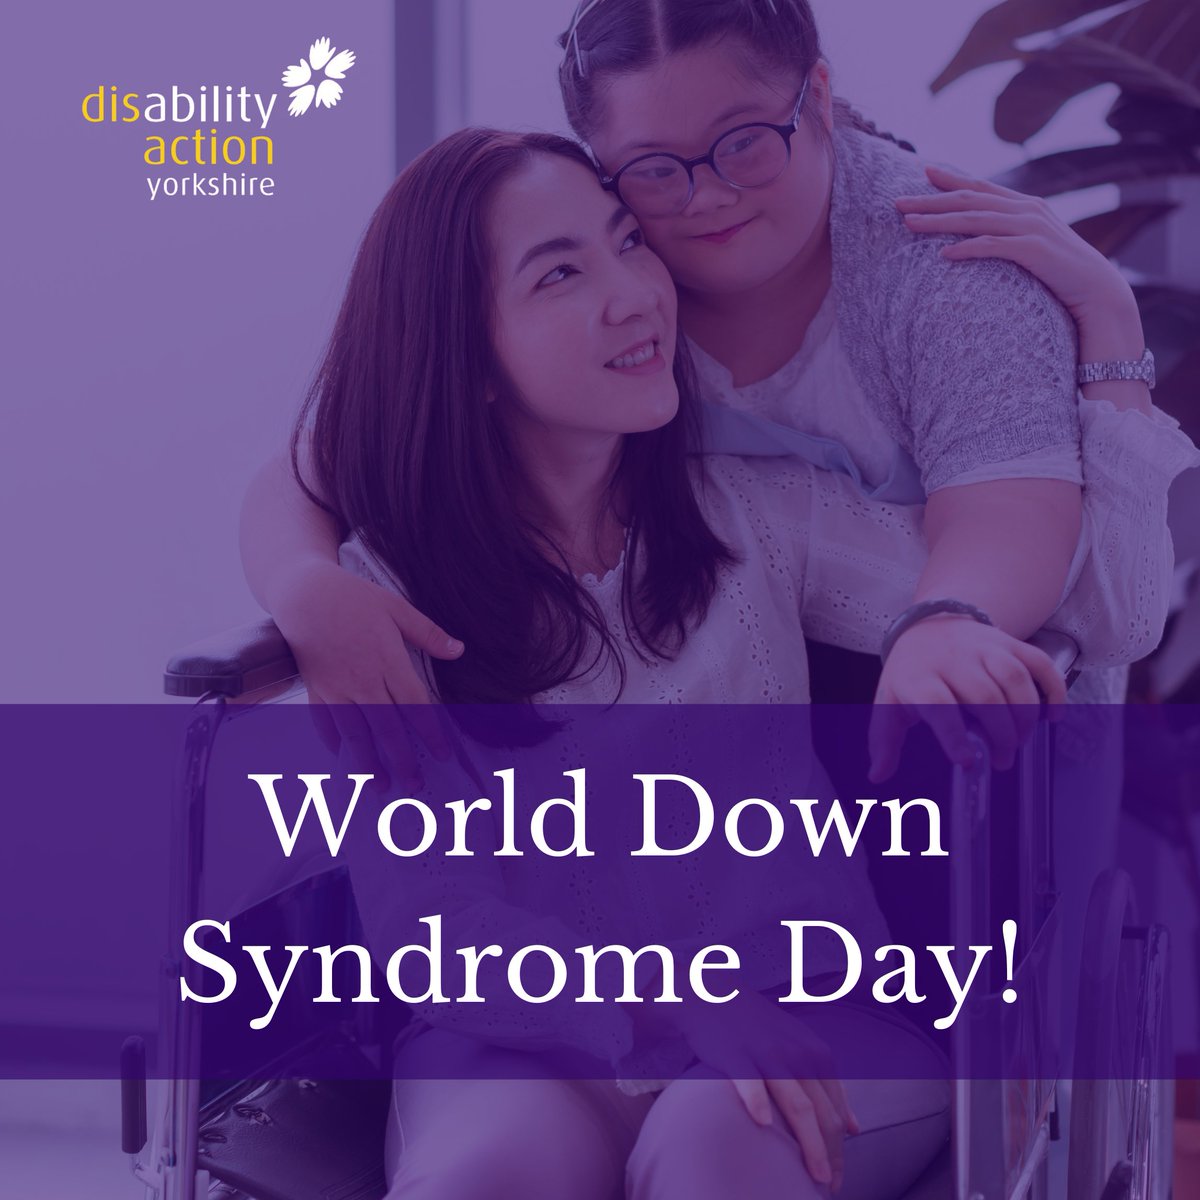 It's World Down Syndrome Day (WDSD), a global celebration of inclusion, diversity, and the incredible individuals with Down syndrome. We believe every person, regardless of their disability, deserves equal opportunities and respect. #WorldDownSyndromeDay #DownSyndrome